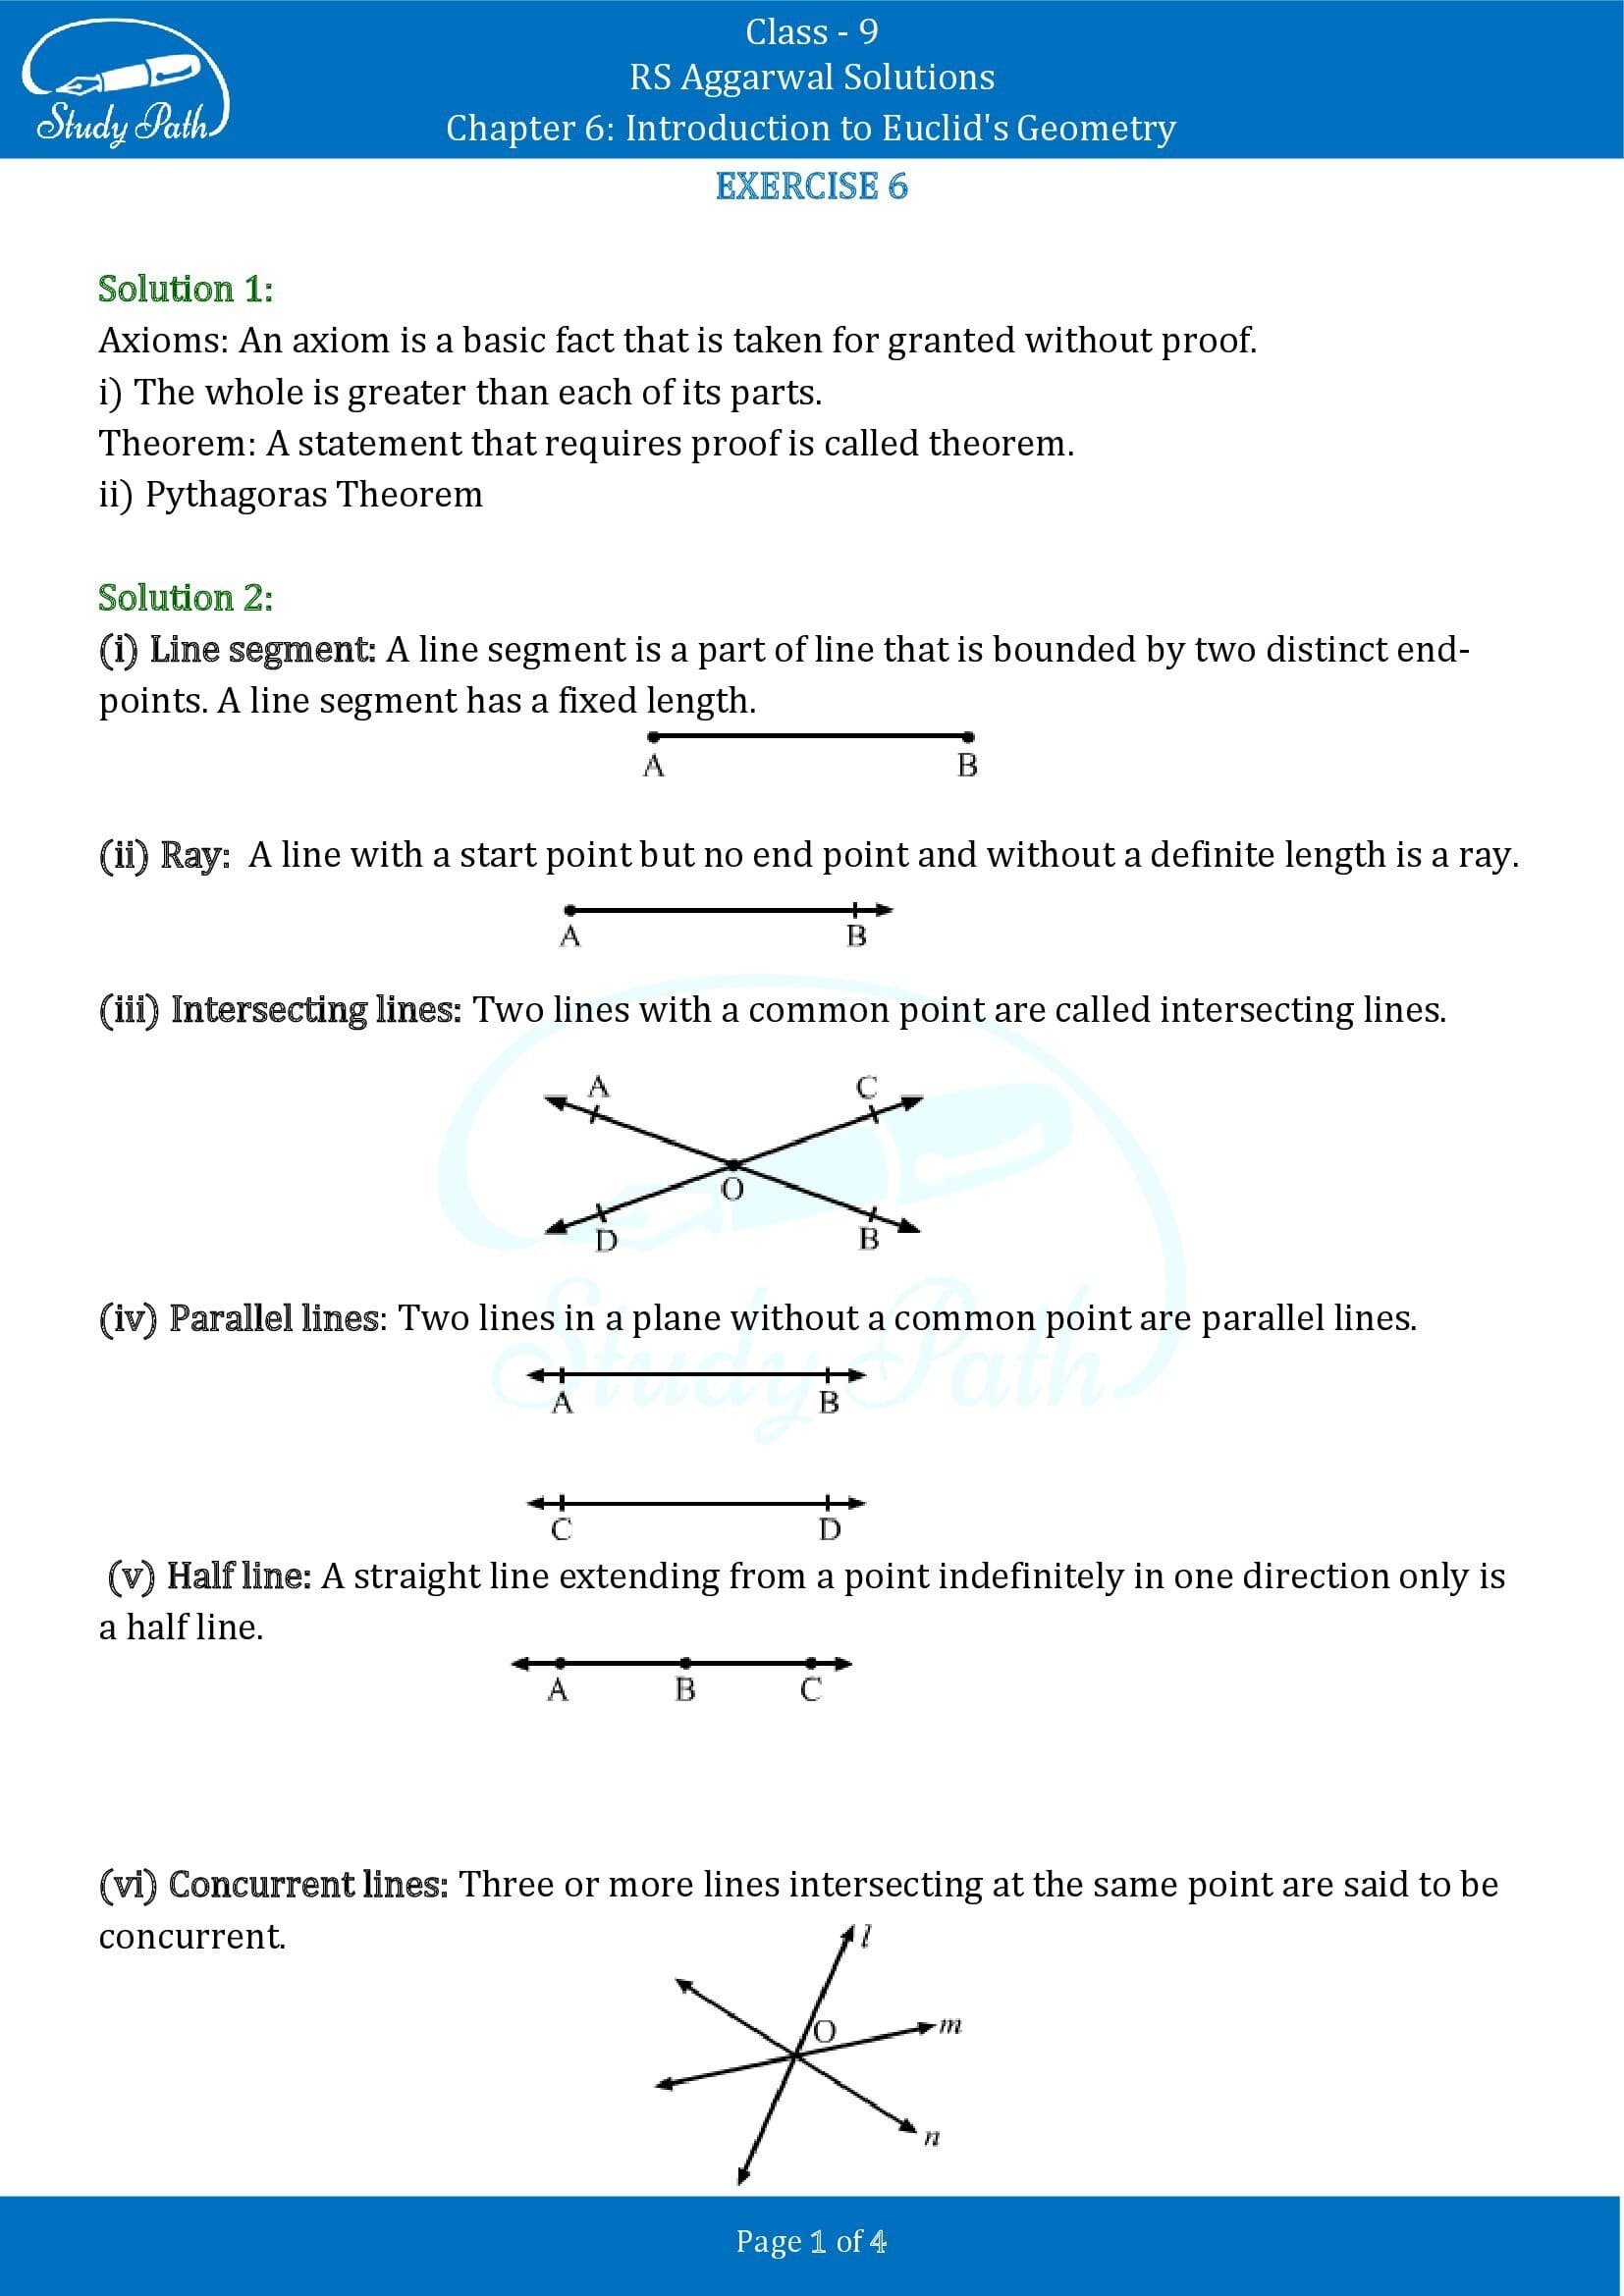 RS Aggarwal Solutions Class 9 Chapter 6 Introduction to Euclids Geometry Exercise 6 00001